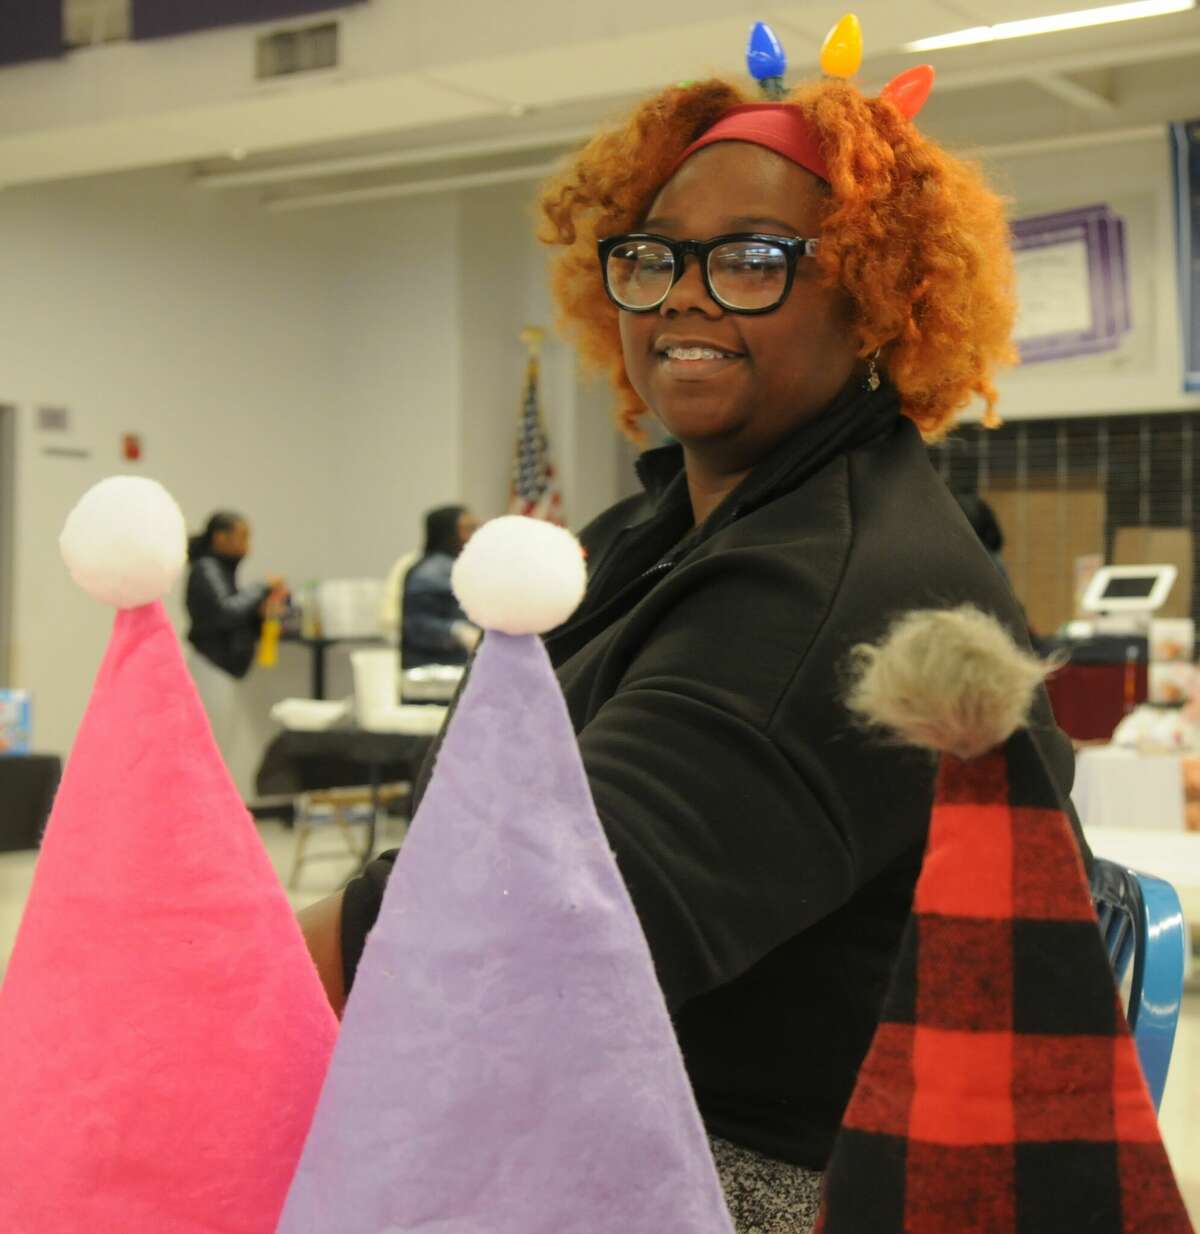 Brytnee' Jackson's face painting booth had holiday props during Saturday's Holiday Craft Fair at Collinsville High School.